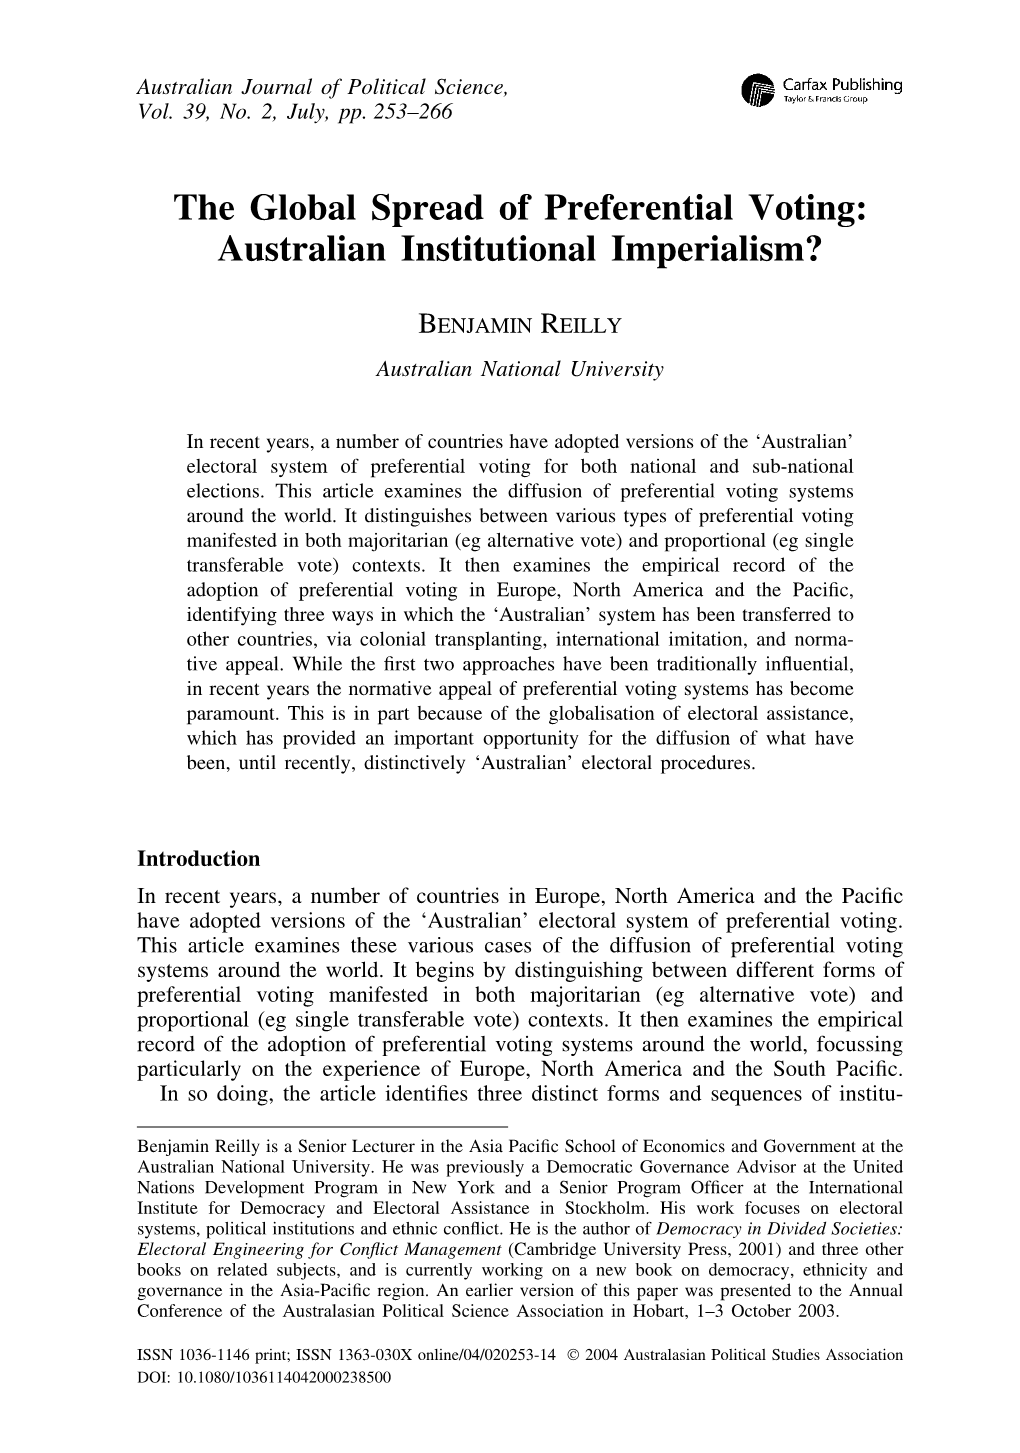 The Global Spread of Preferential Voting: Australian Institutional Imperialism?